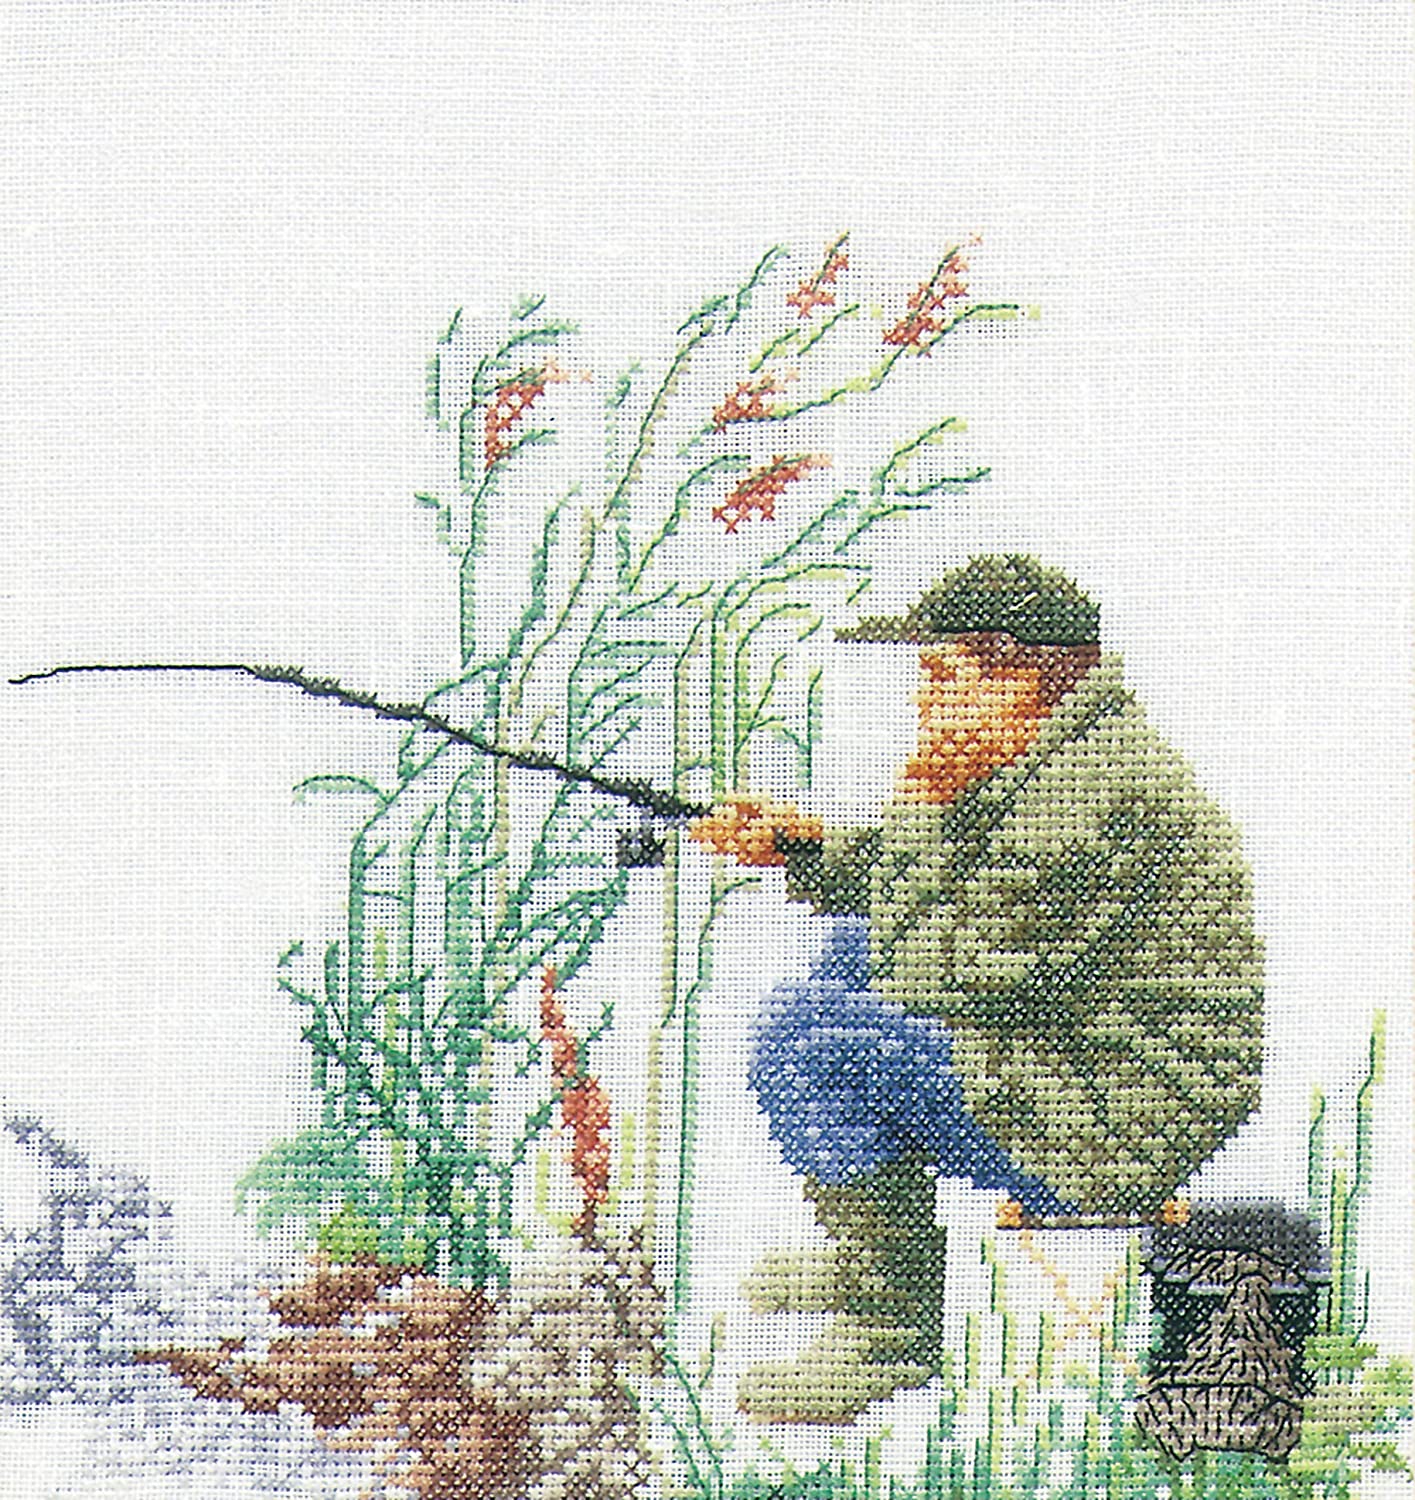 Thea Gouverneur Cross Stitch Kit - Vissen / Fishing 3034. Counted cross stitch kit from the fabulous Thea Gouverneur in The Netherlands. This kit is available on either Aida or linen.